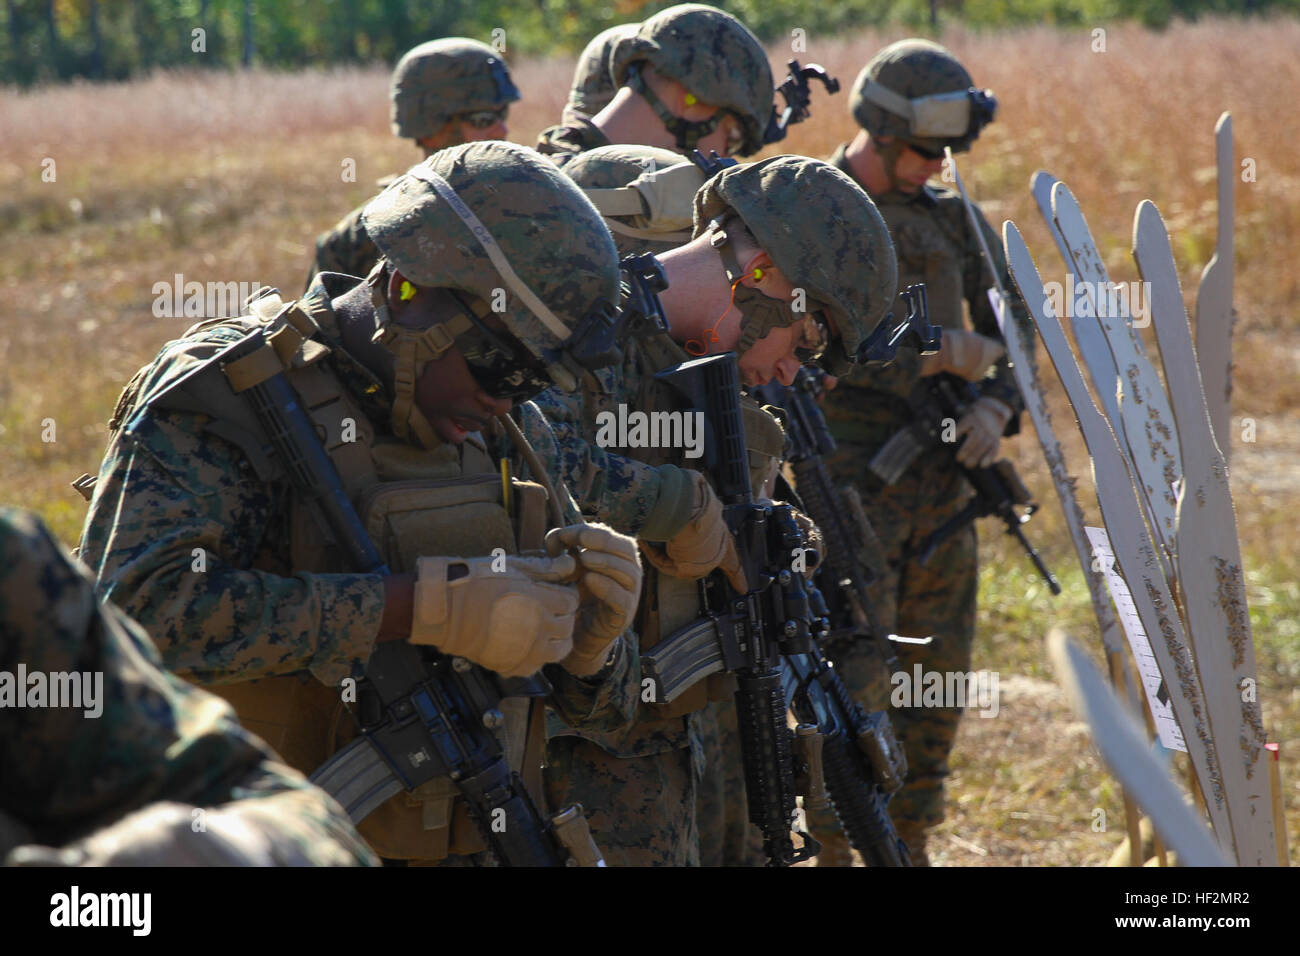 Marines with Bravo Company, Battalion Landing Team 3rd Battalion, 6th Marine Regiment, 24th Marine Expeditionary Unit, review their targets during a weapons calibration exercise at Camp Lejeune, N.C., Nov. 7, 2014. The Marines conducted the training to ensure all weapon systems are working properly and are ready for the upcoming deployment at the end of the year. Bravo Co. is the BLT’s Light Armored Reconnaissance detachment from 2nd Light Armored Reconnaissance Battalion, 2nd Marine Division.  (U.S. Marine Corps photo by Lance Cpl. Austin A. Lewis) 24th MEU's LAR Detachment Shoots for Mission Stock Photo